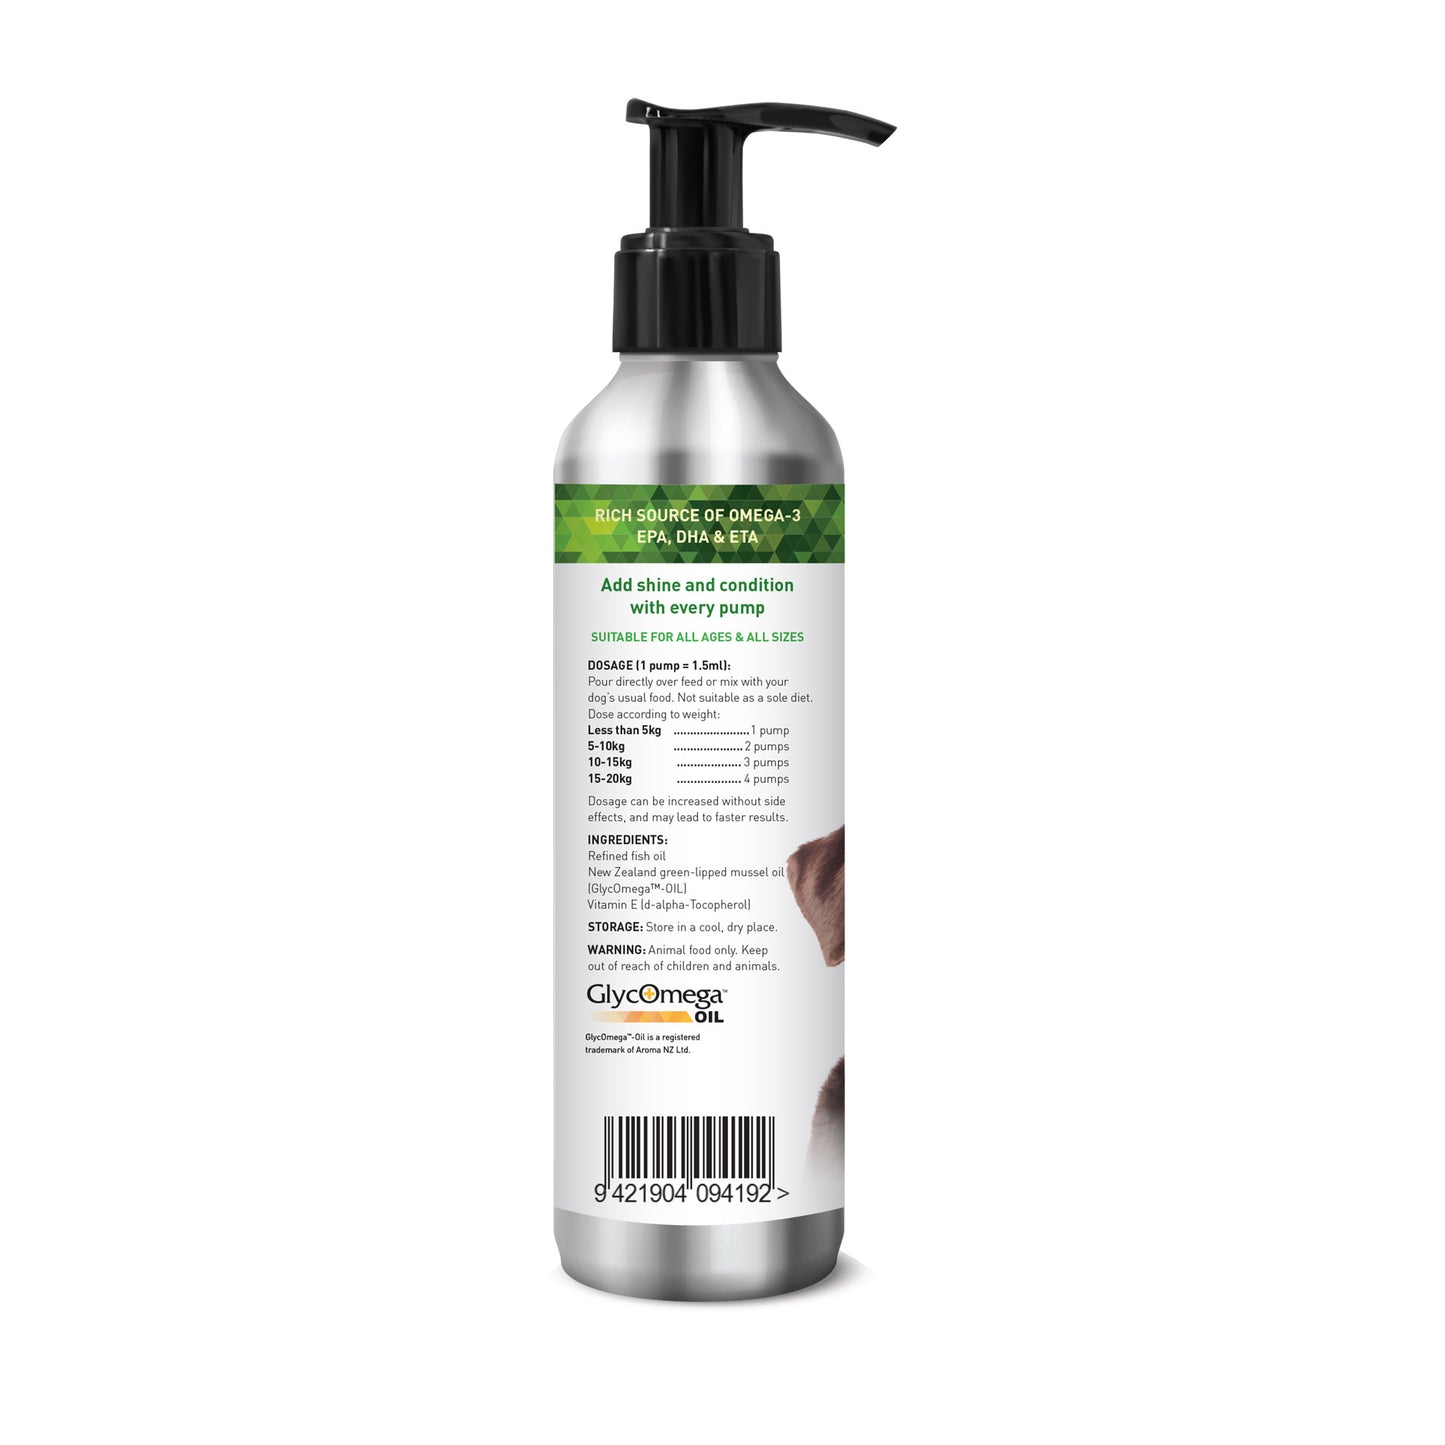 Nutreats skin coat and mobility - supplement for dogs supporting healthy joint health , skin and coat. 100% natural with green-lipped mussel oil rich in Omega-3, DHA, EPA and ETA.